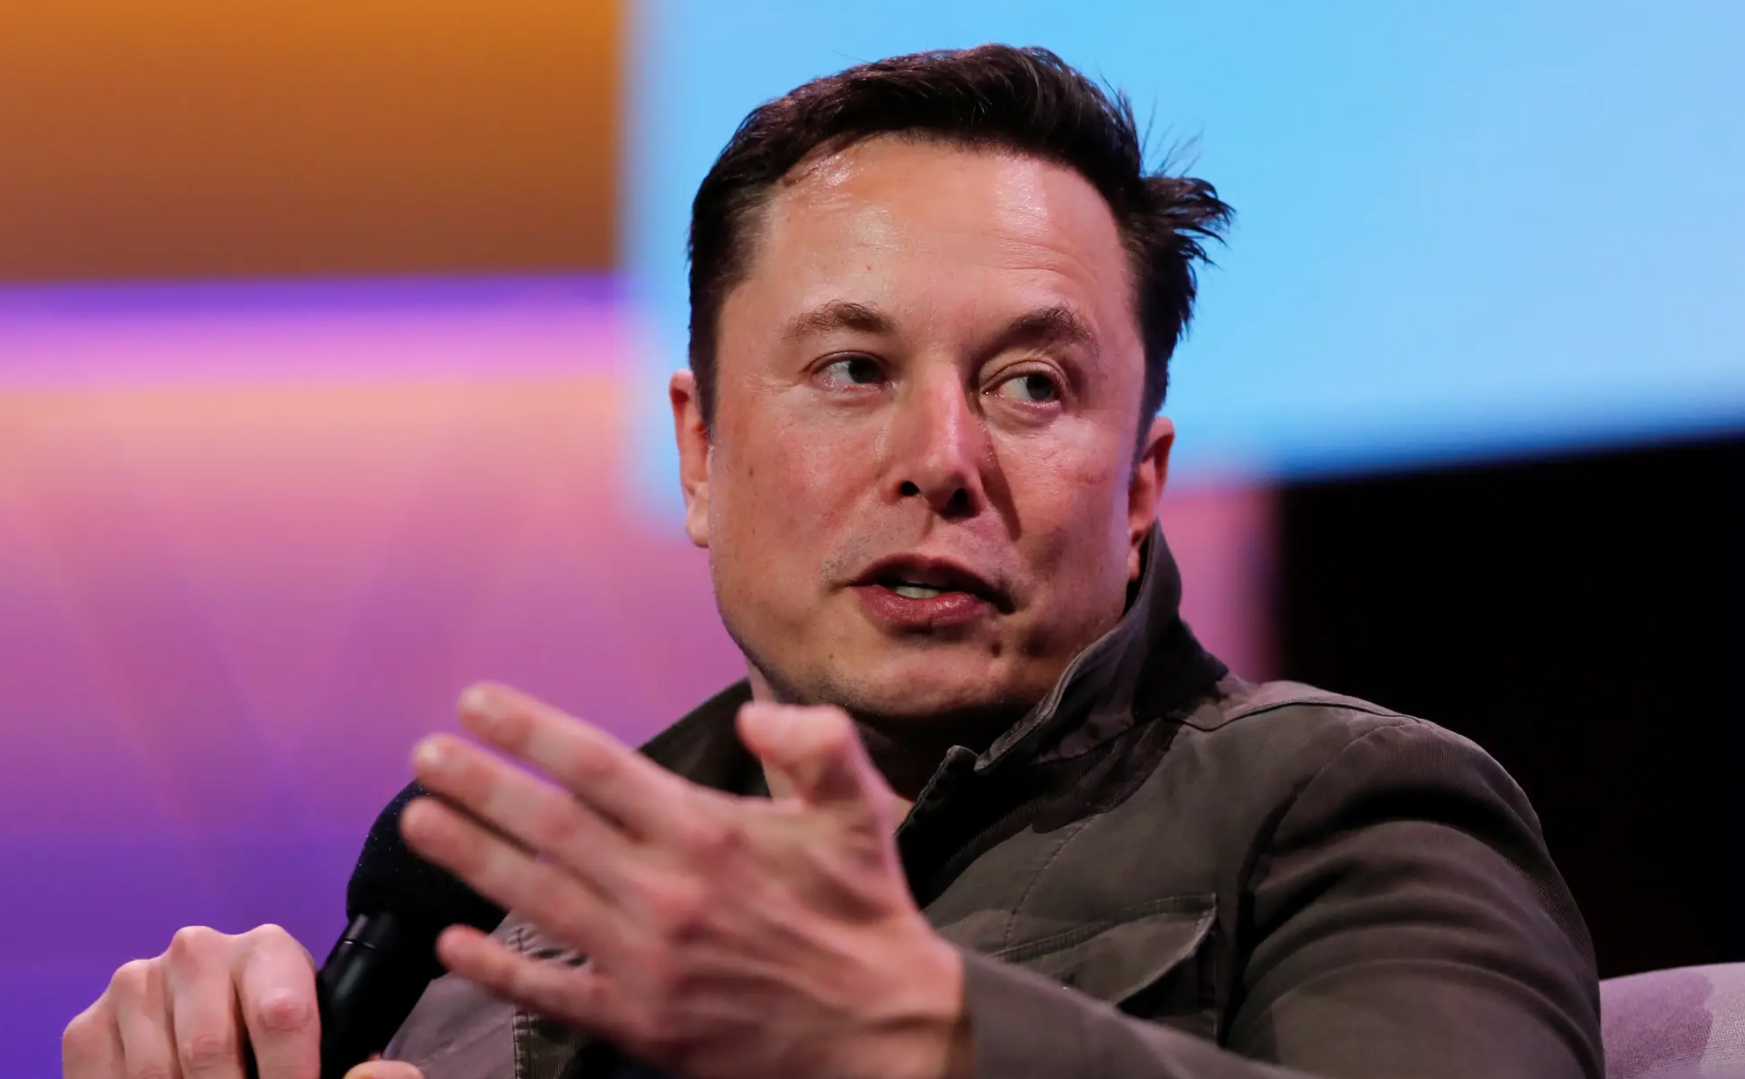 Read about Elon Musk's business strategies